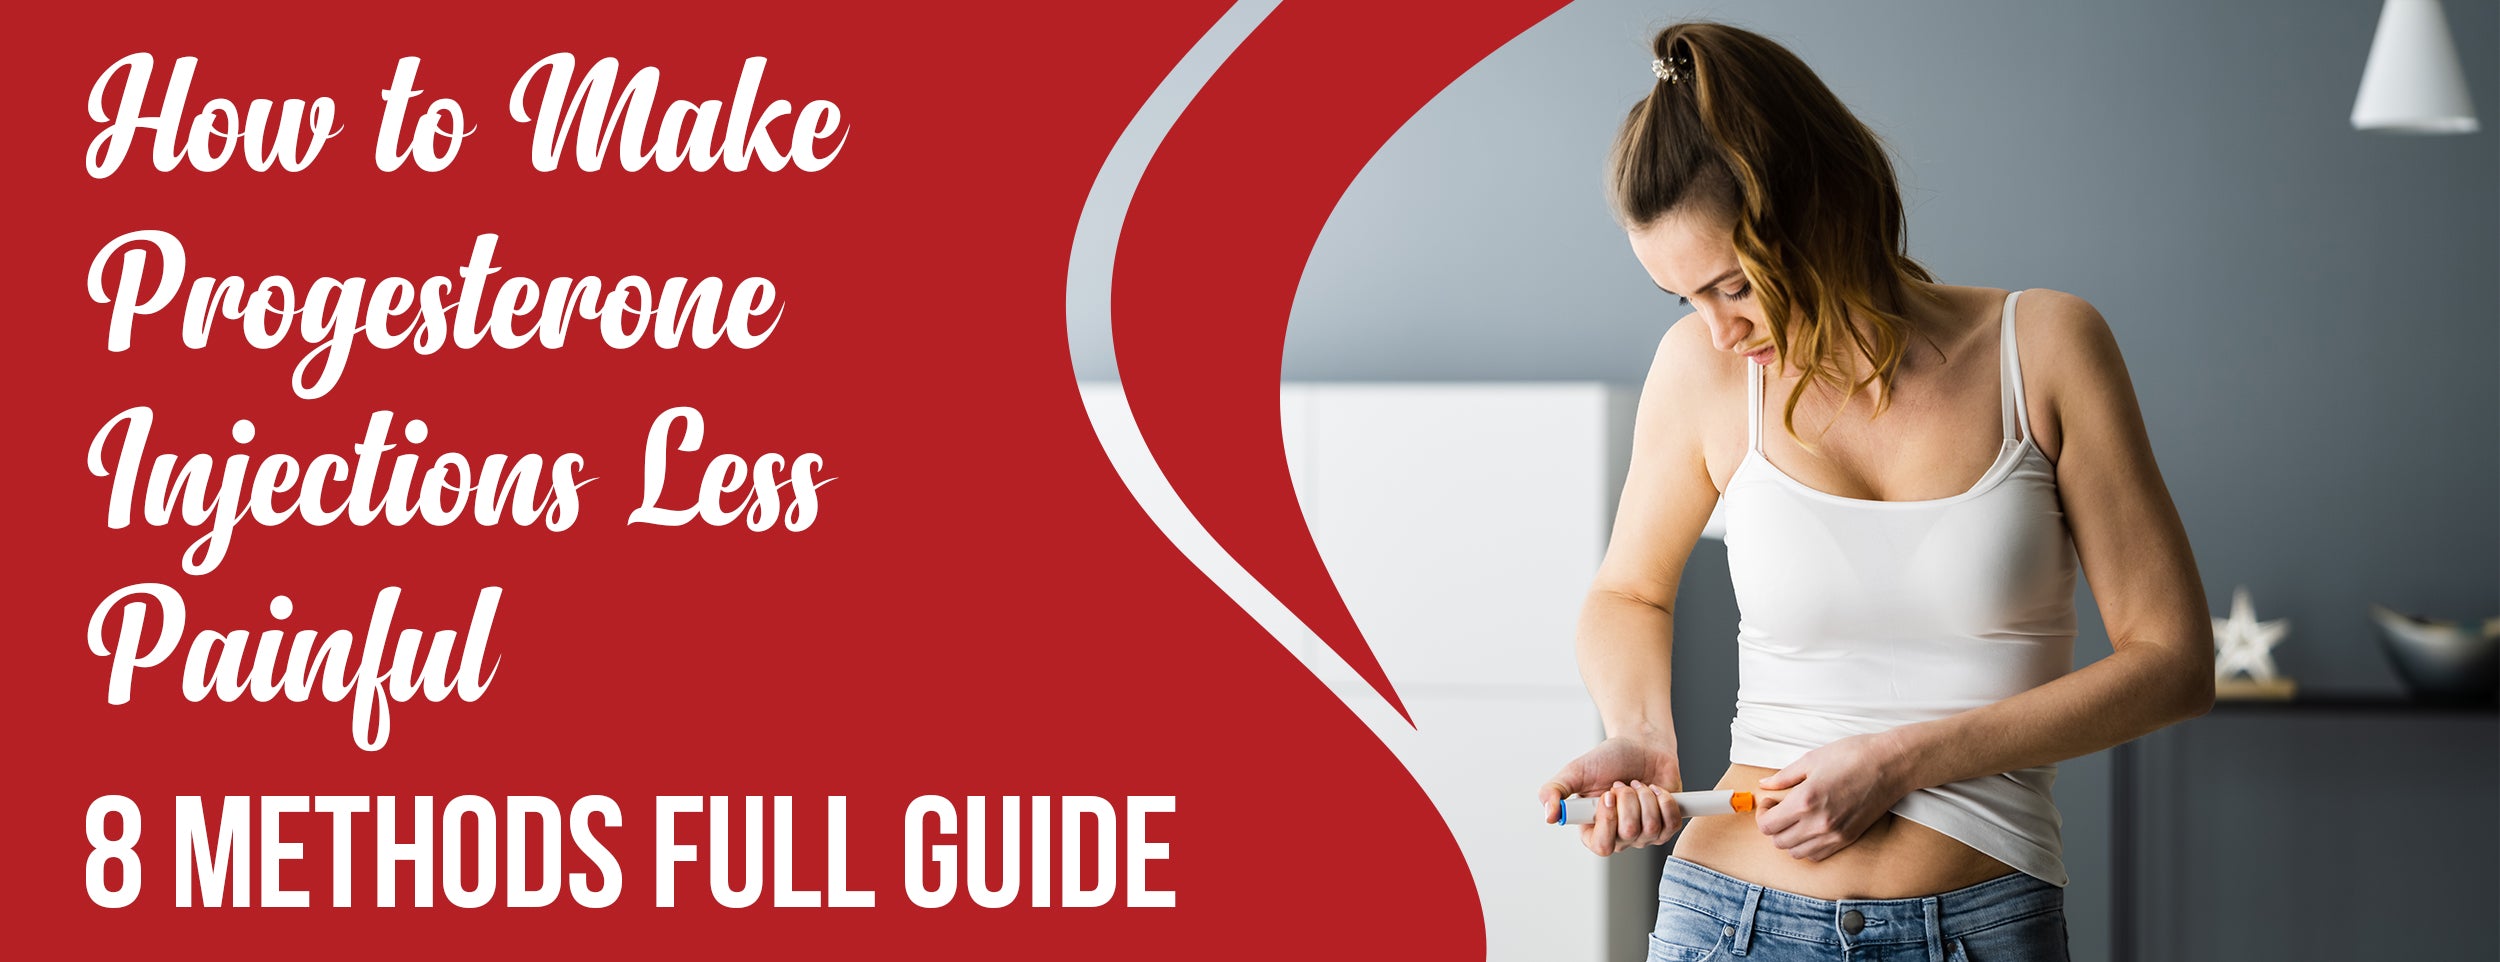 8 Ways to Make Progesterone Injections Less Painful with 5 More Tips